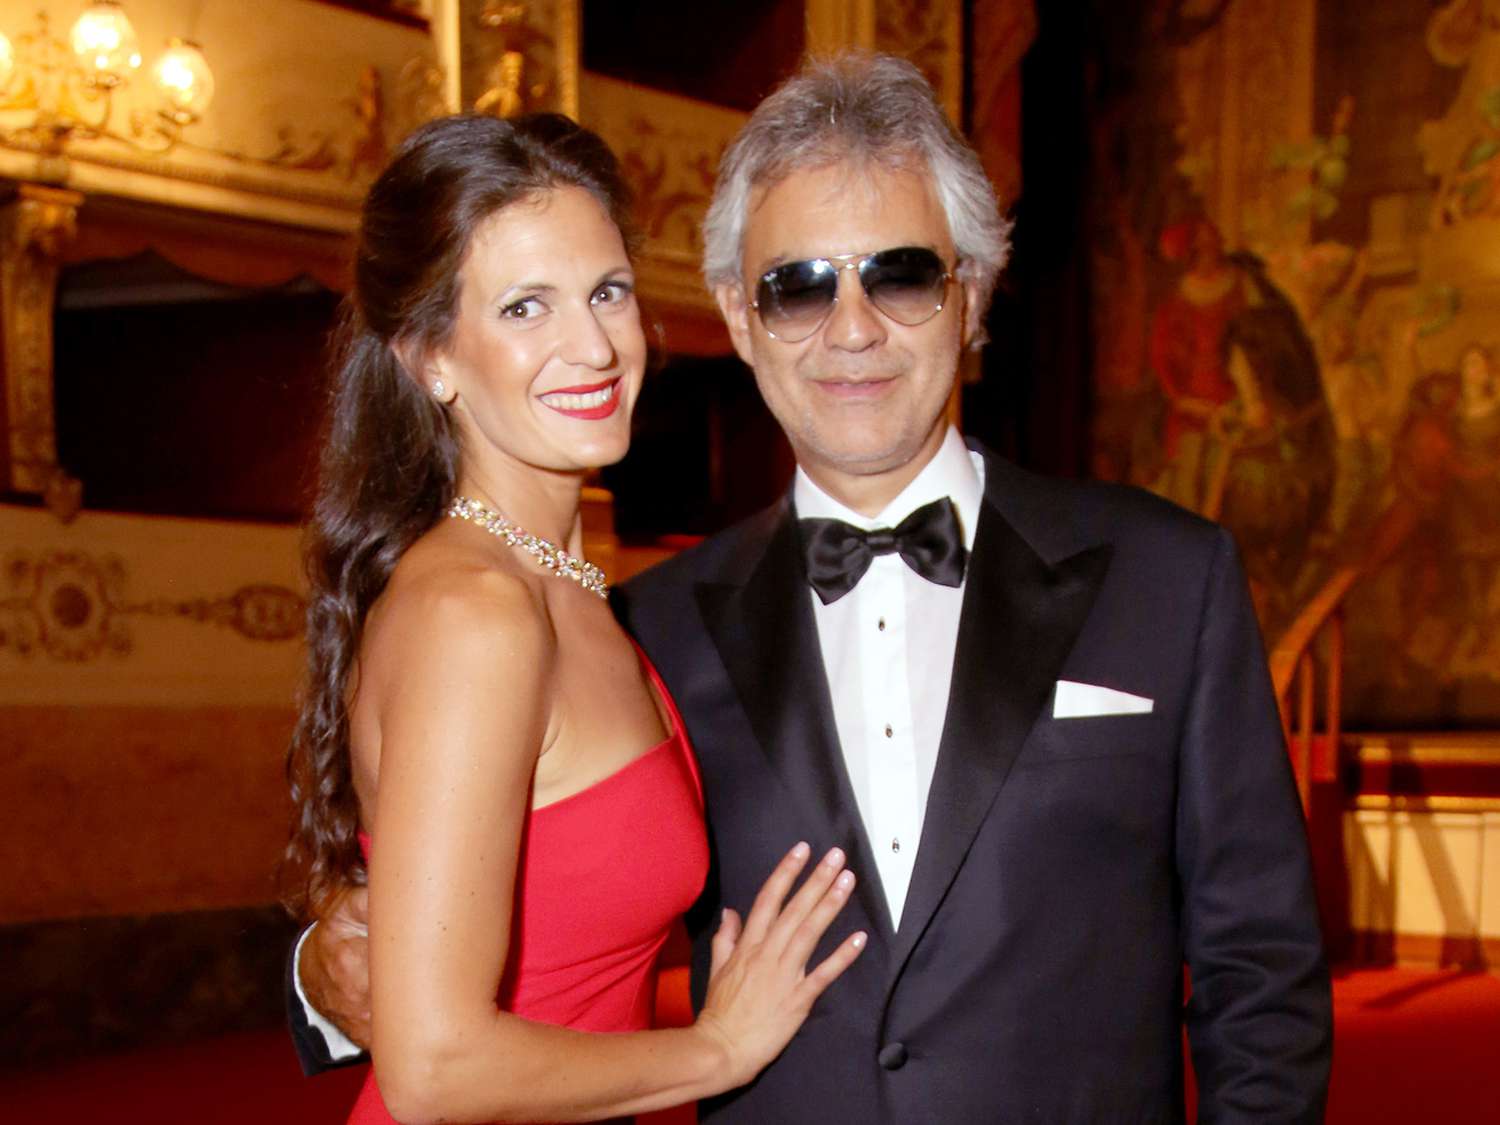 Andrea Bocelli's wife Veronica Berti Biography: Wikipedia, Age, Net Worth, Instagram, Siblings, Filmography. Awards